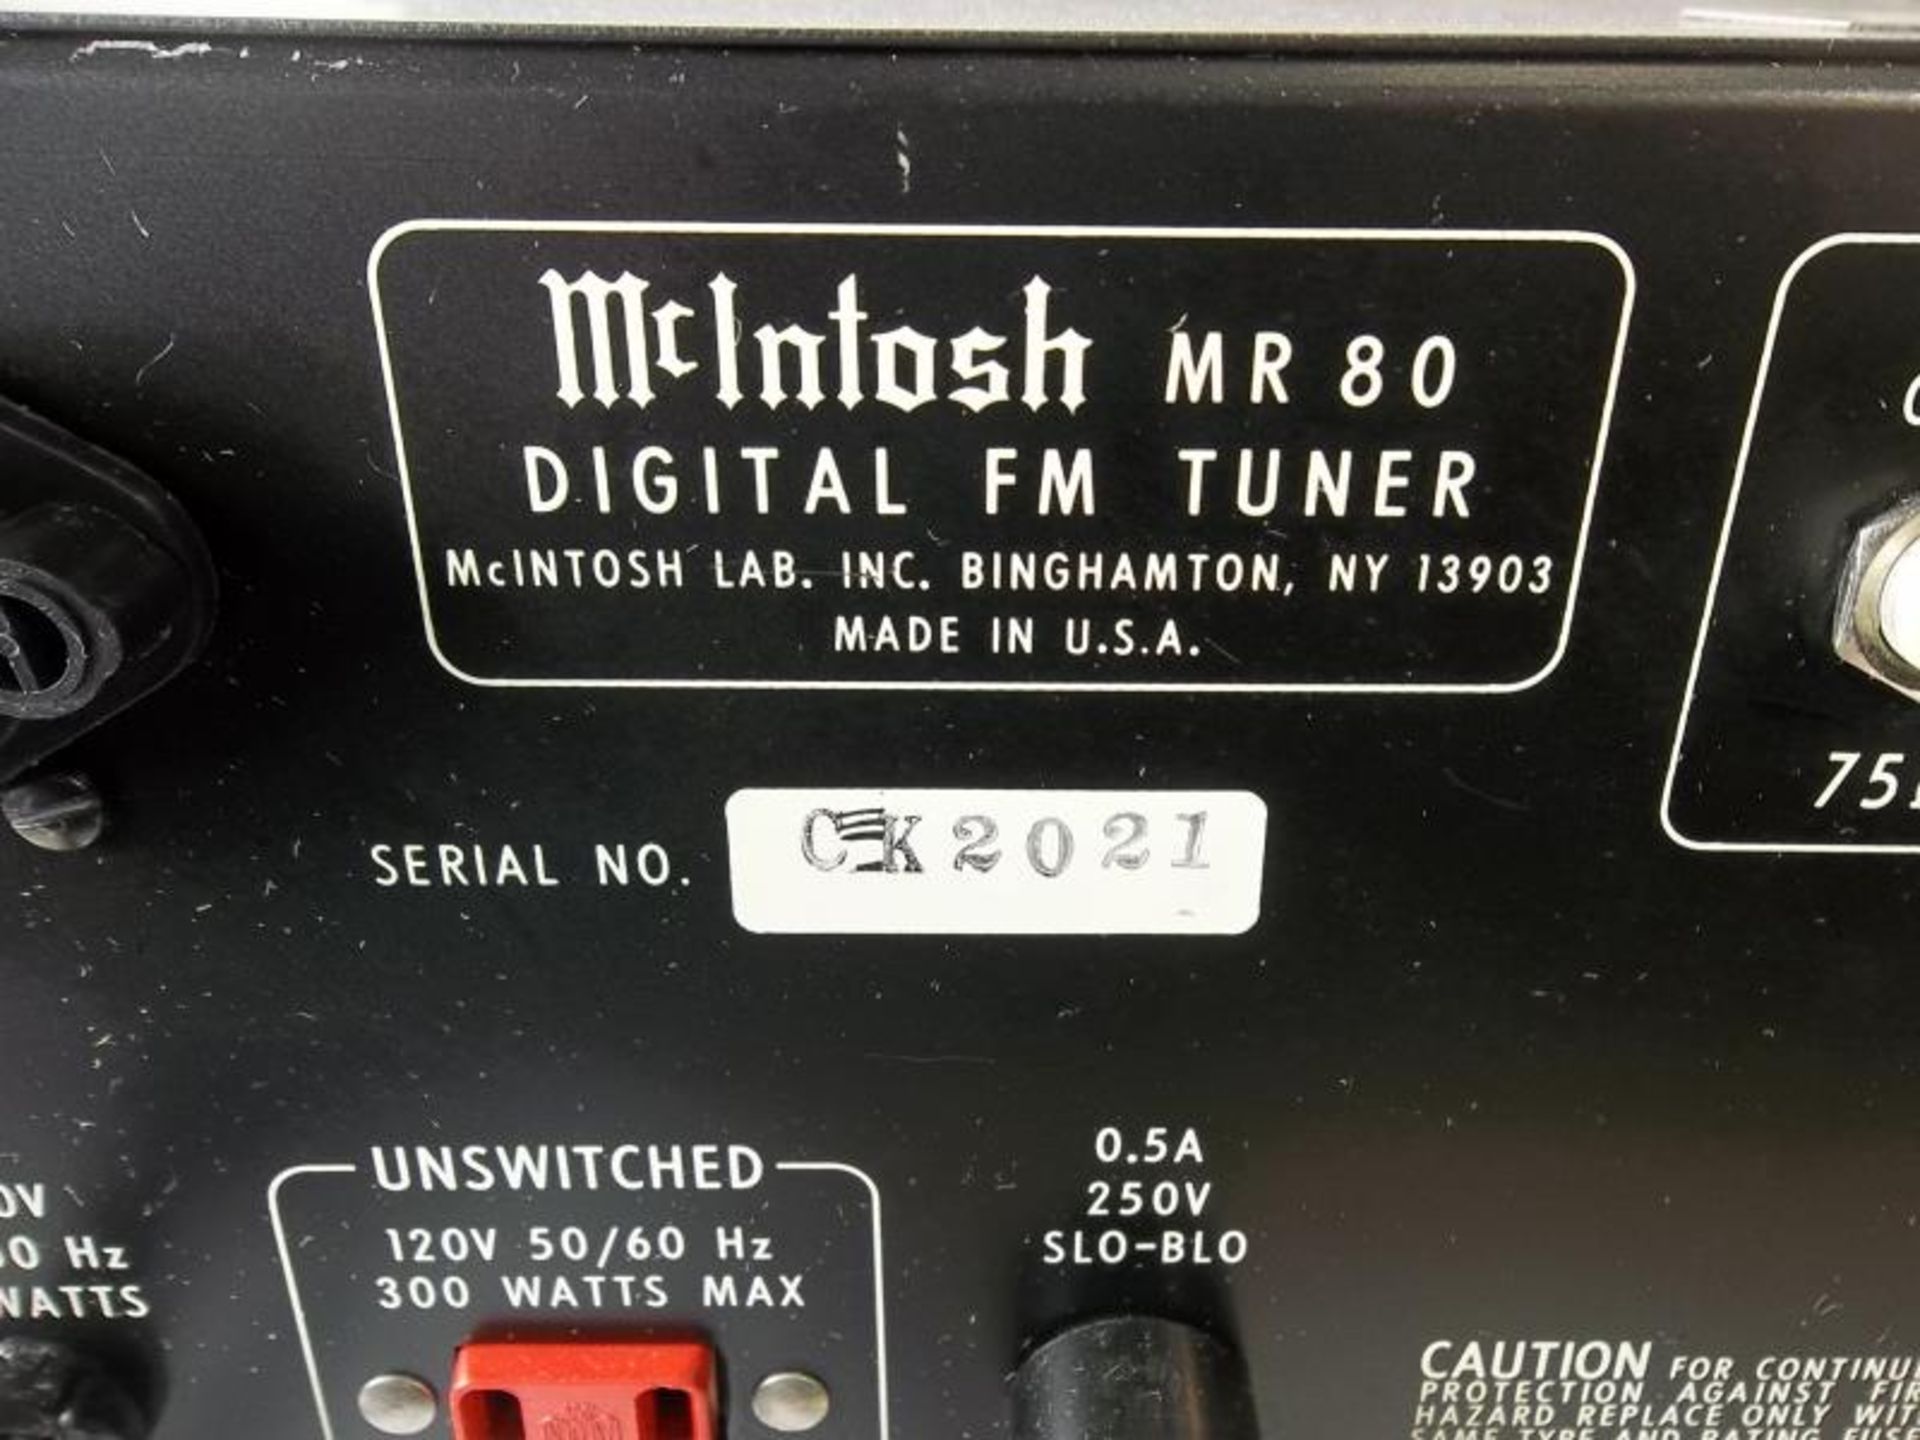 McIntosh MR 80, AM FM Tuner, s # CK2021, in matching McIntosh cardboard box, tested- powers up - Image 7 of 8